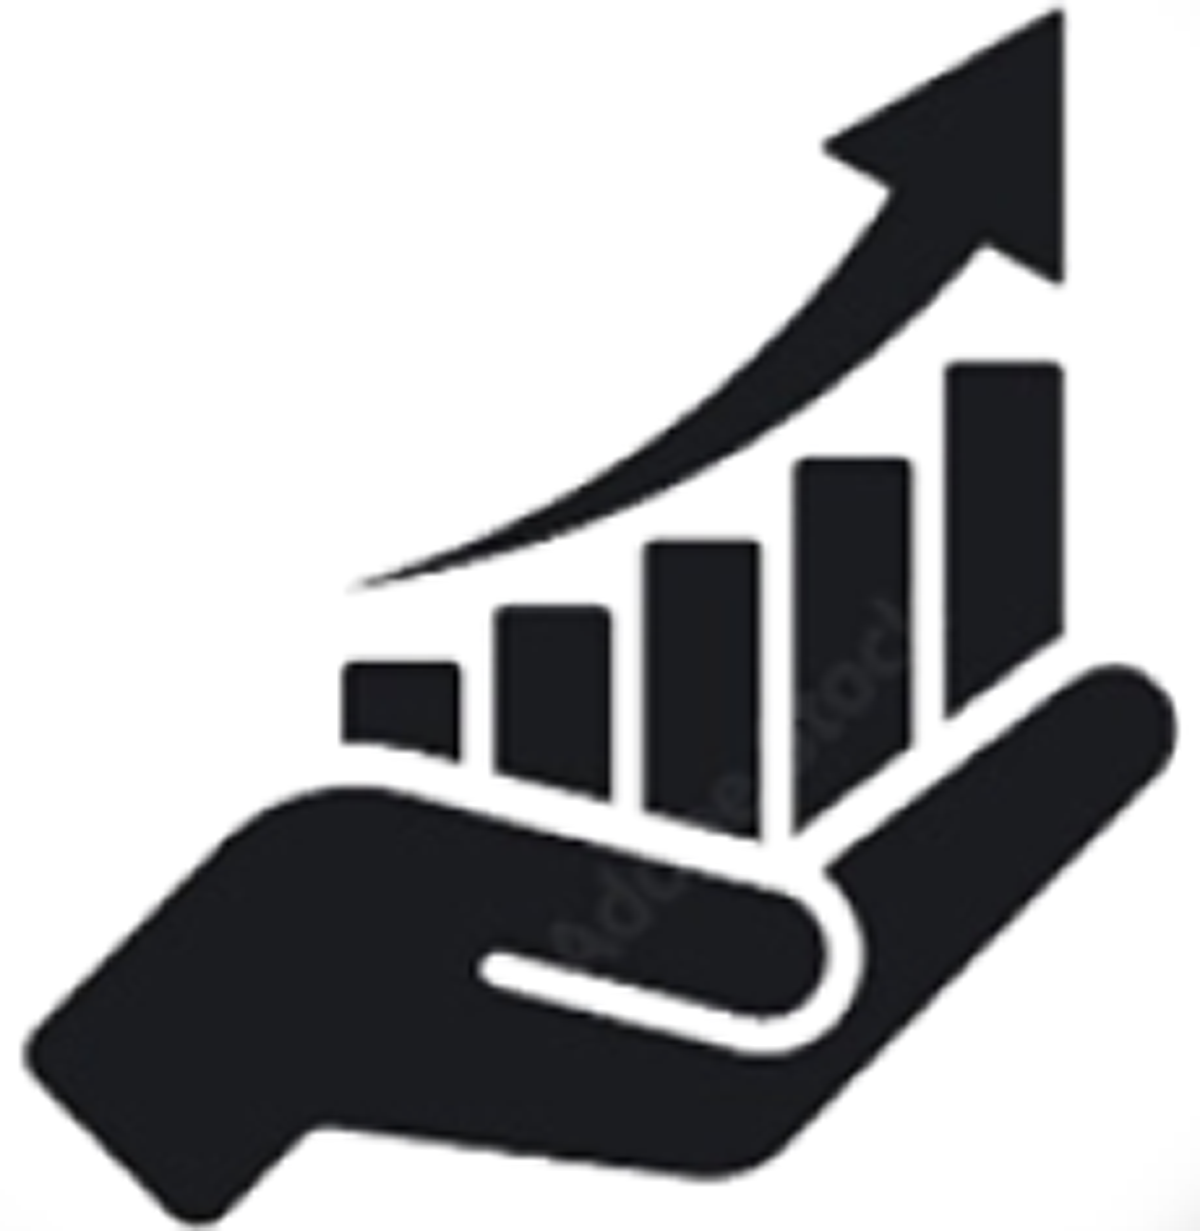 Icon – Black hand holding a bar graph showing progress and an arrow pointing up.